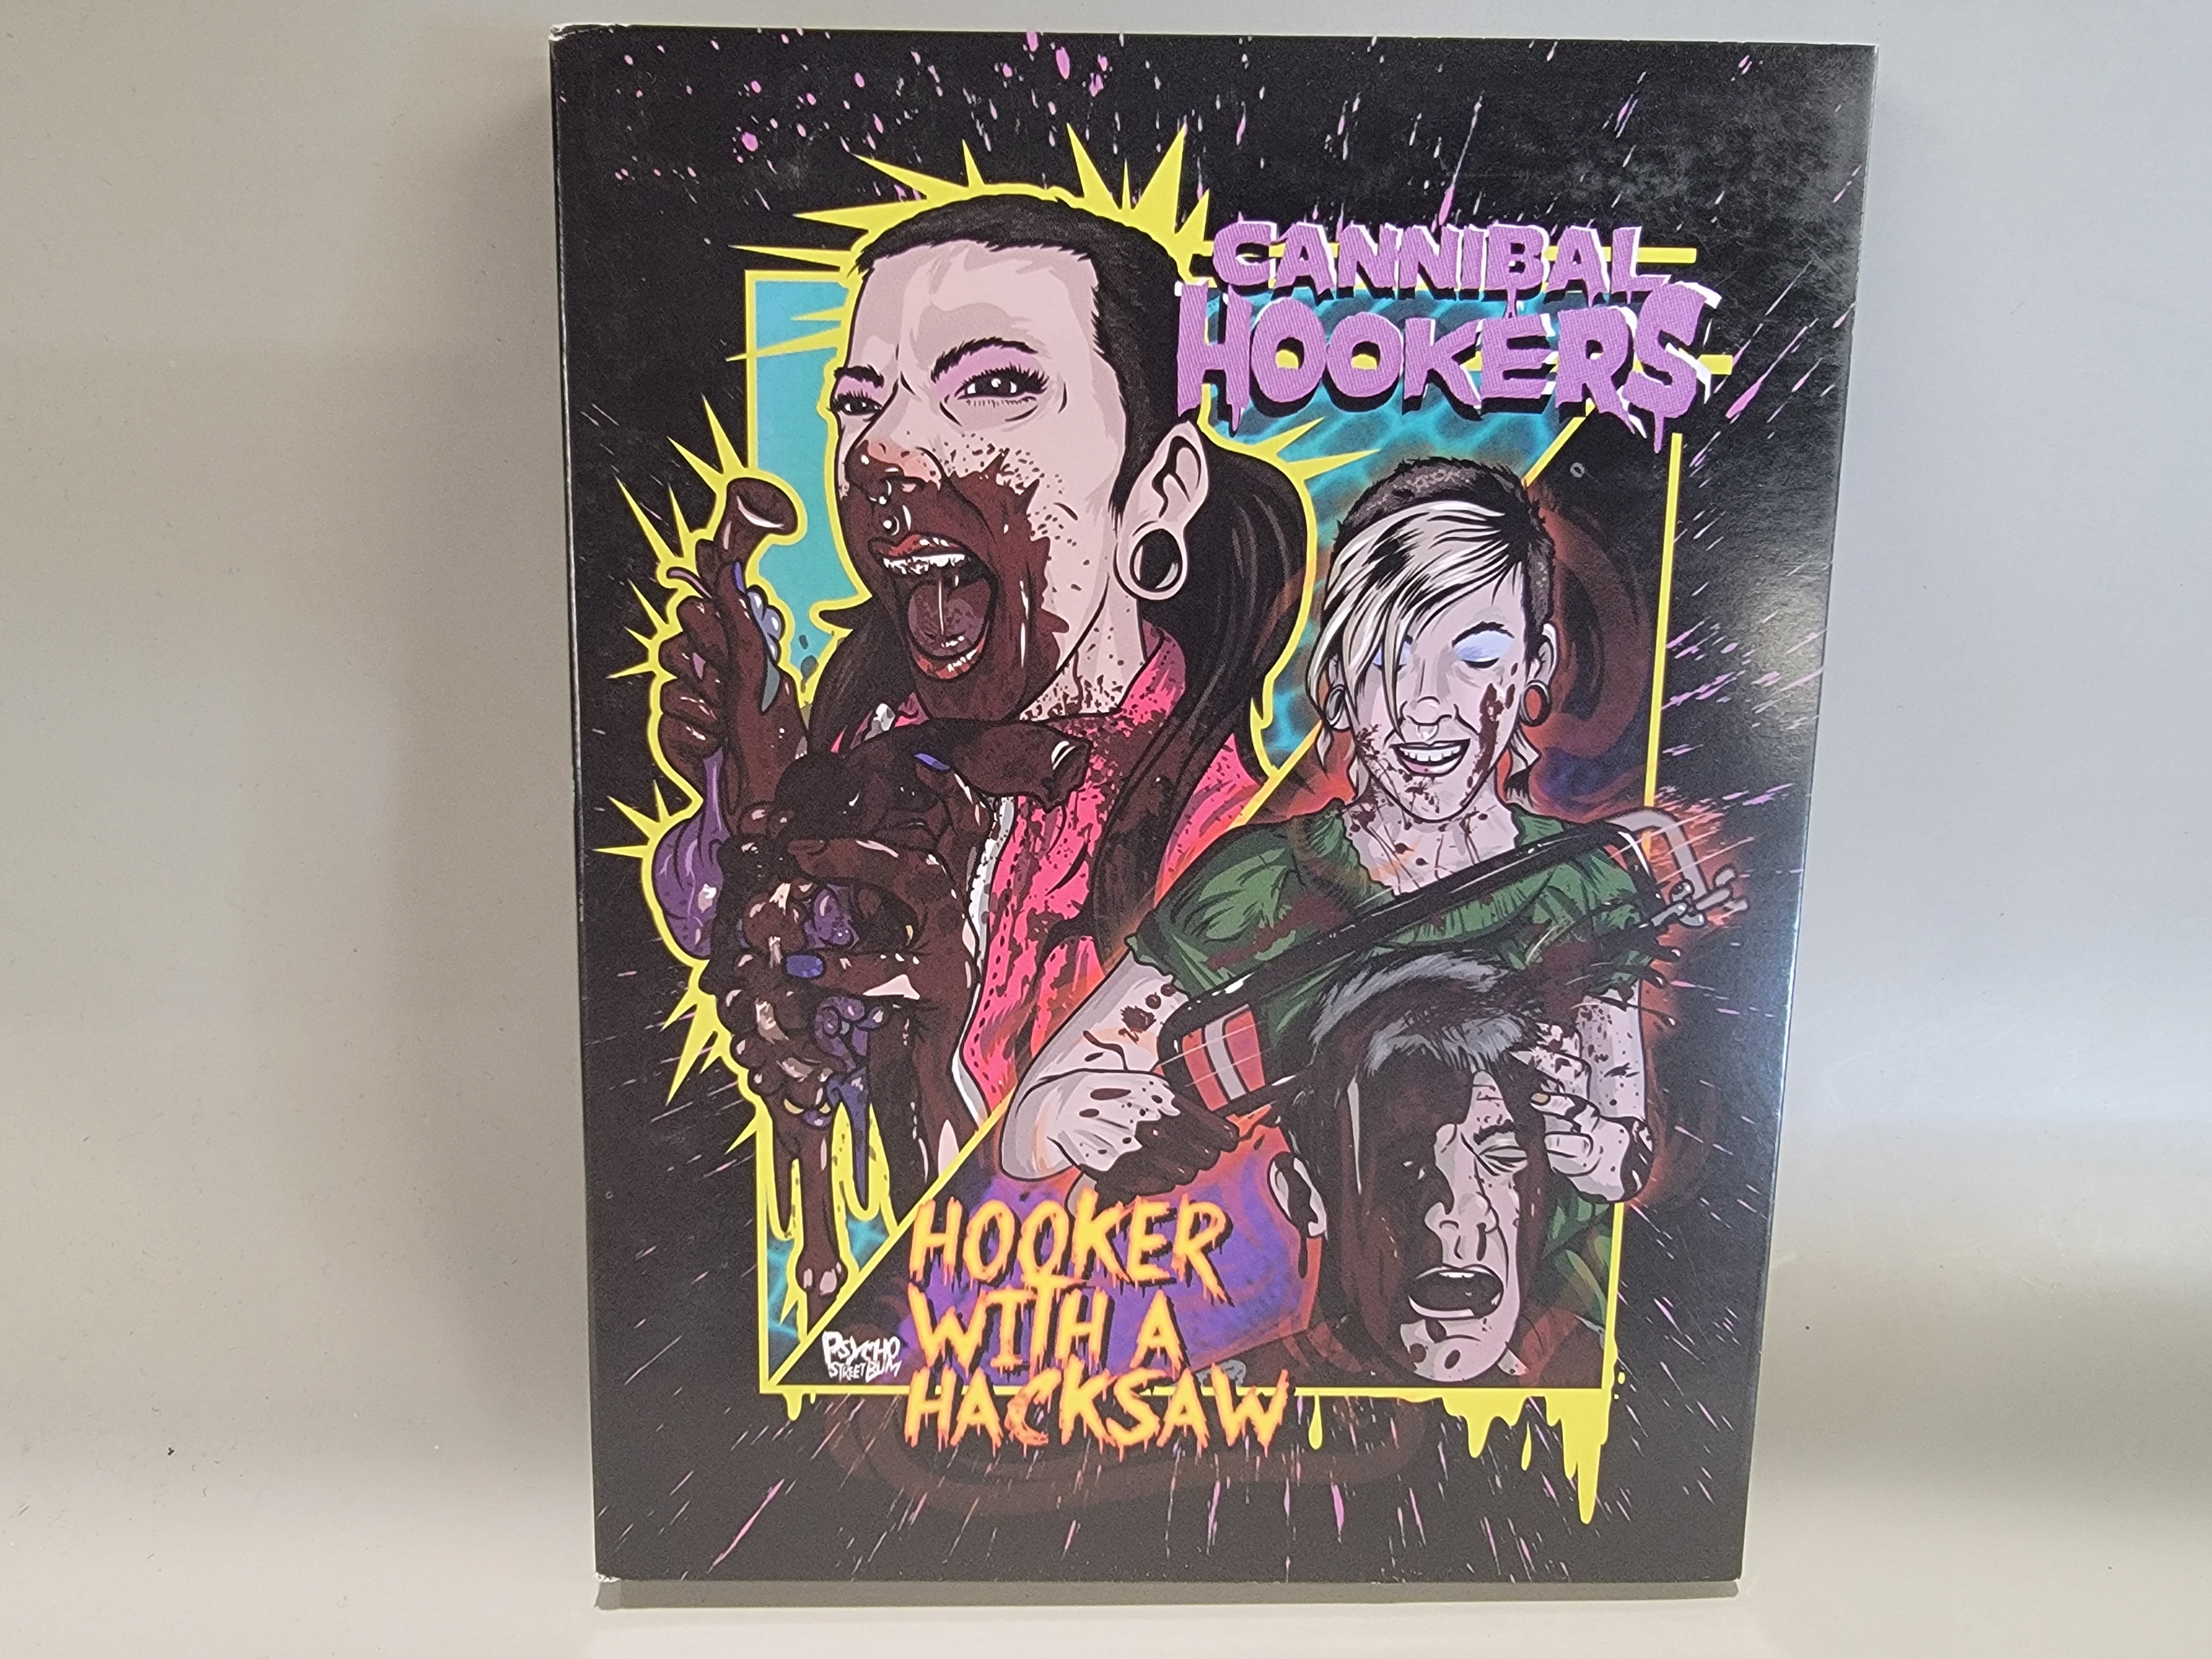 CANNIBAL HOOKERS / HOOKER WITH A HACKSAW BLU-RAY [USED]